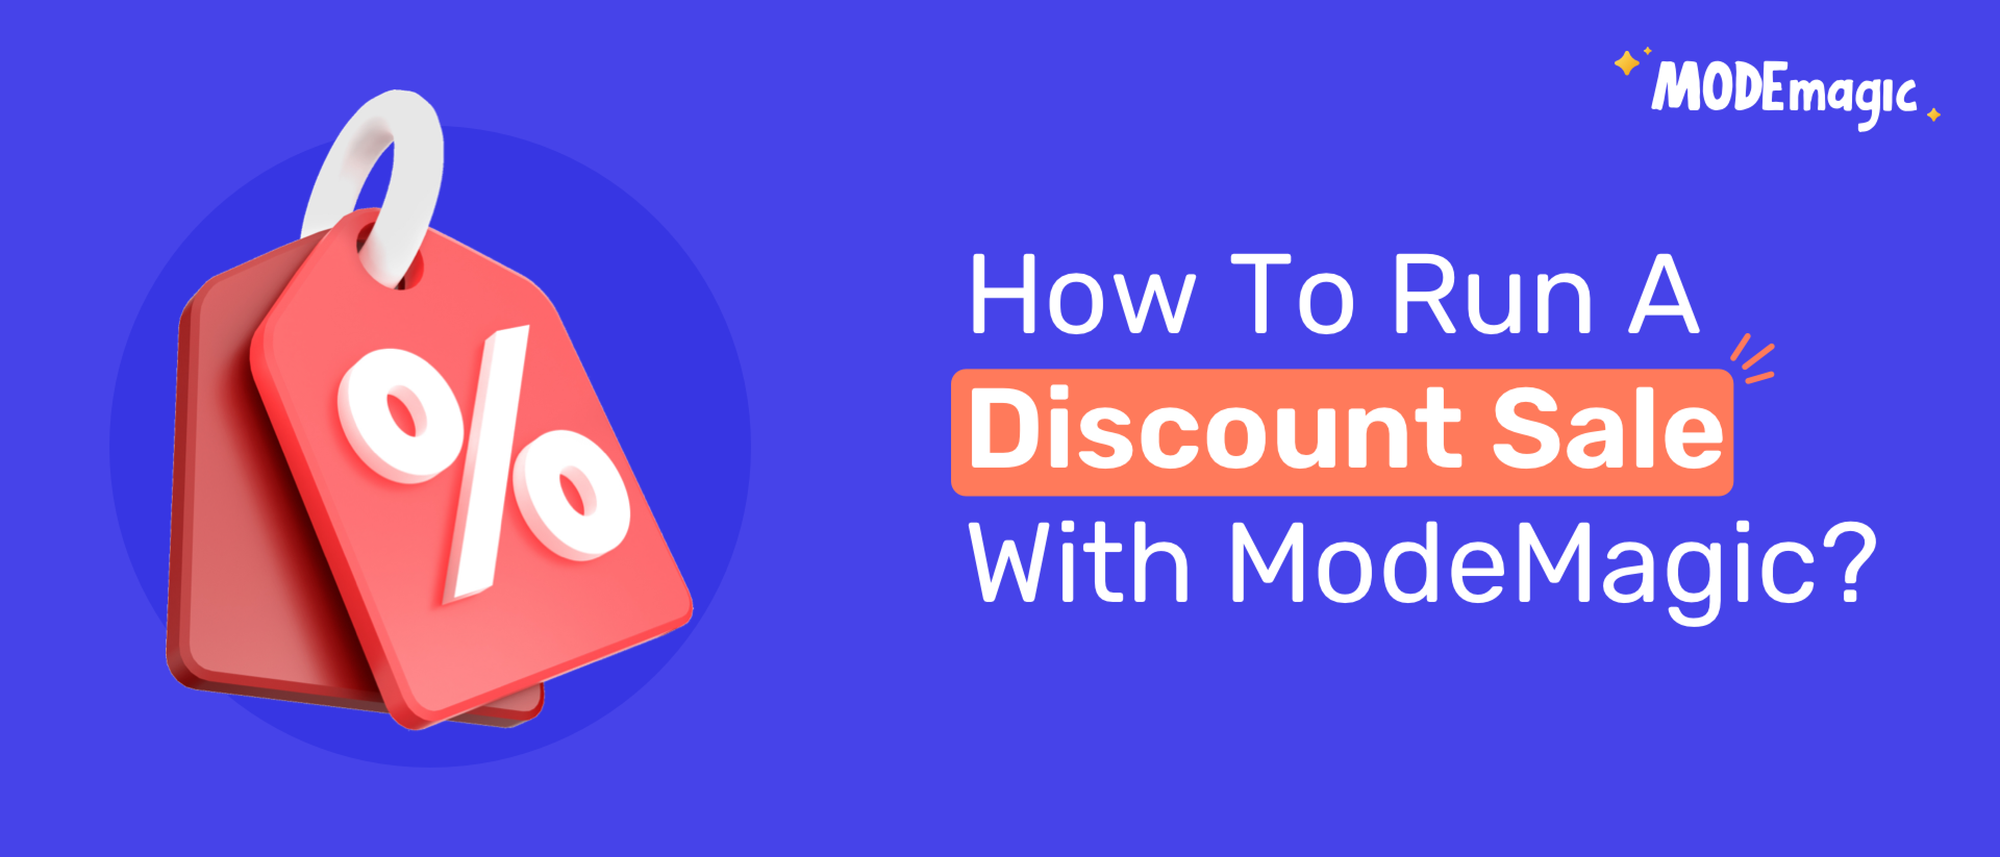 BFCM 2022: How to Run a Discount Sale with ModeMagic